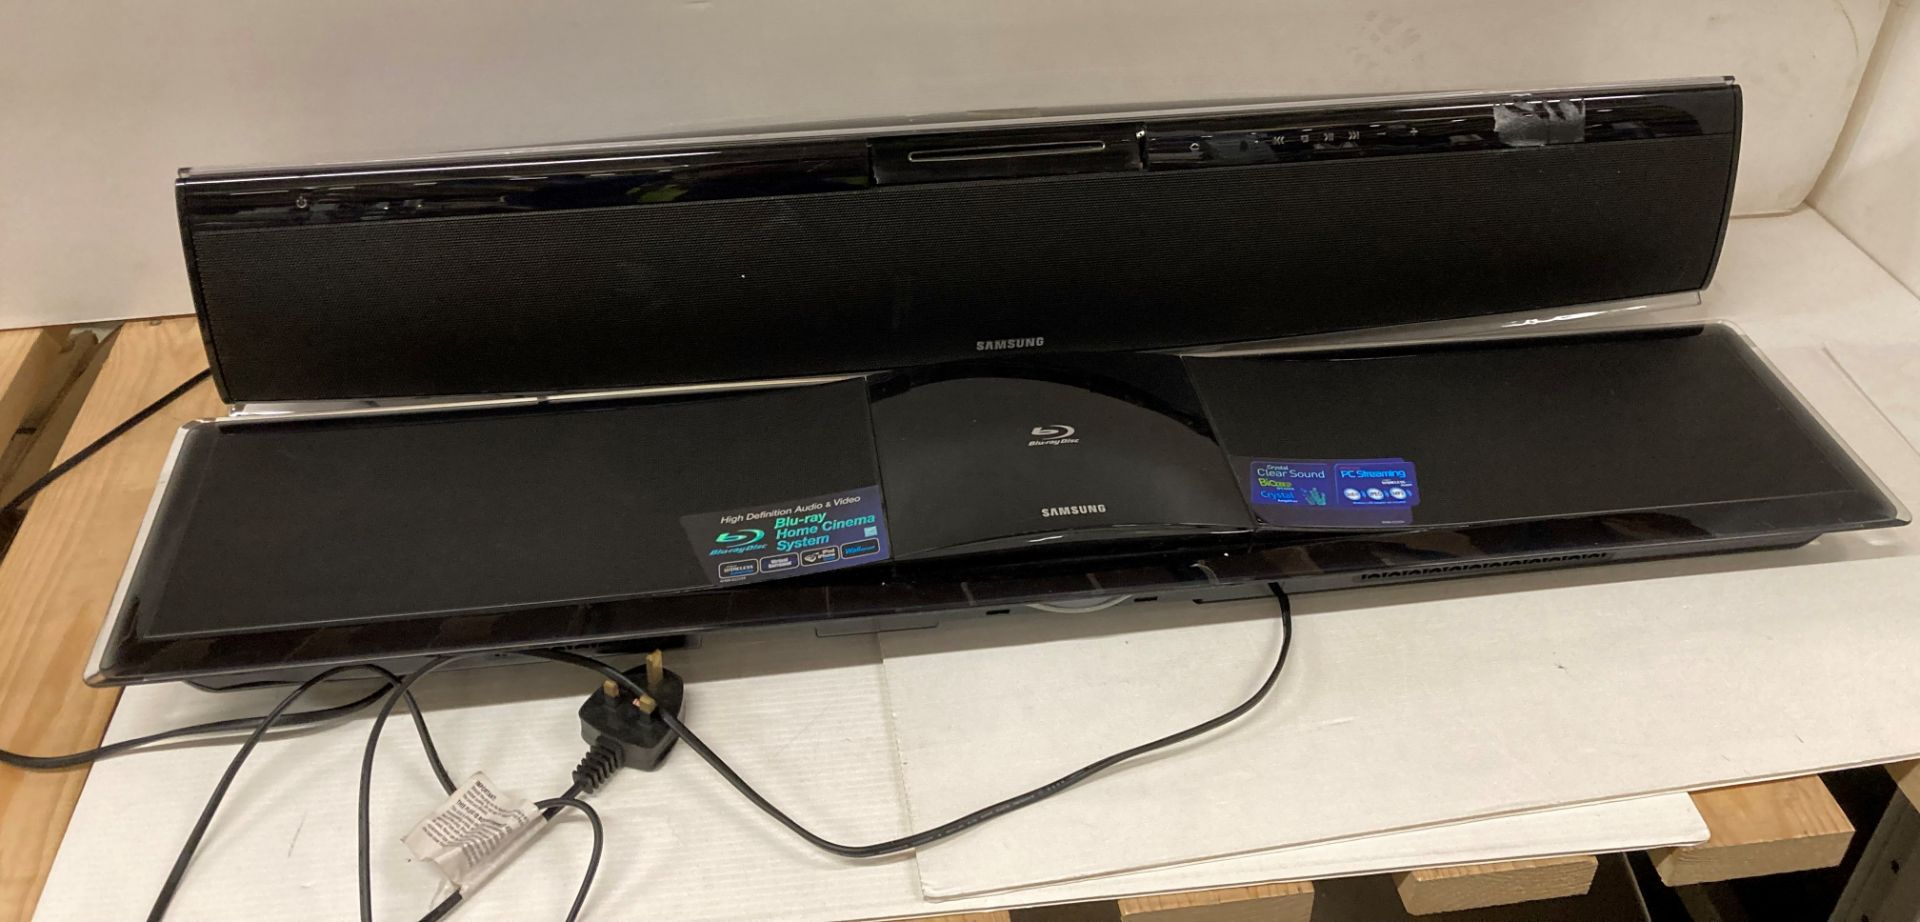 2 x Samsung sound bars both with power leads (saleroom location: K13) Further Information